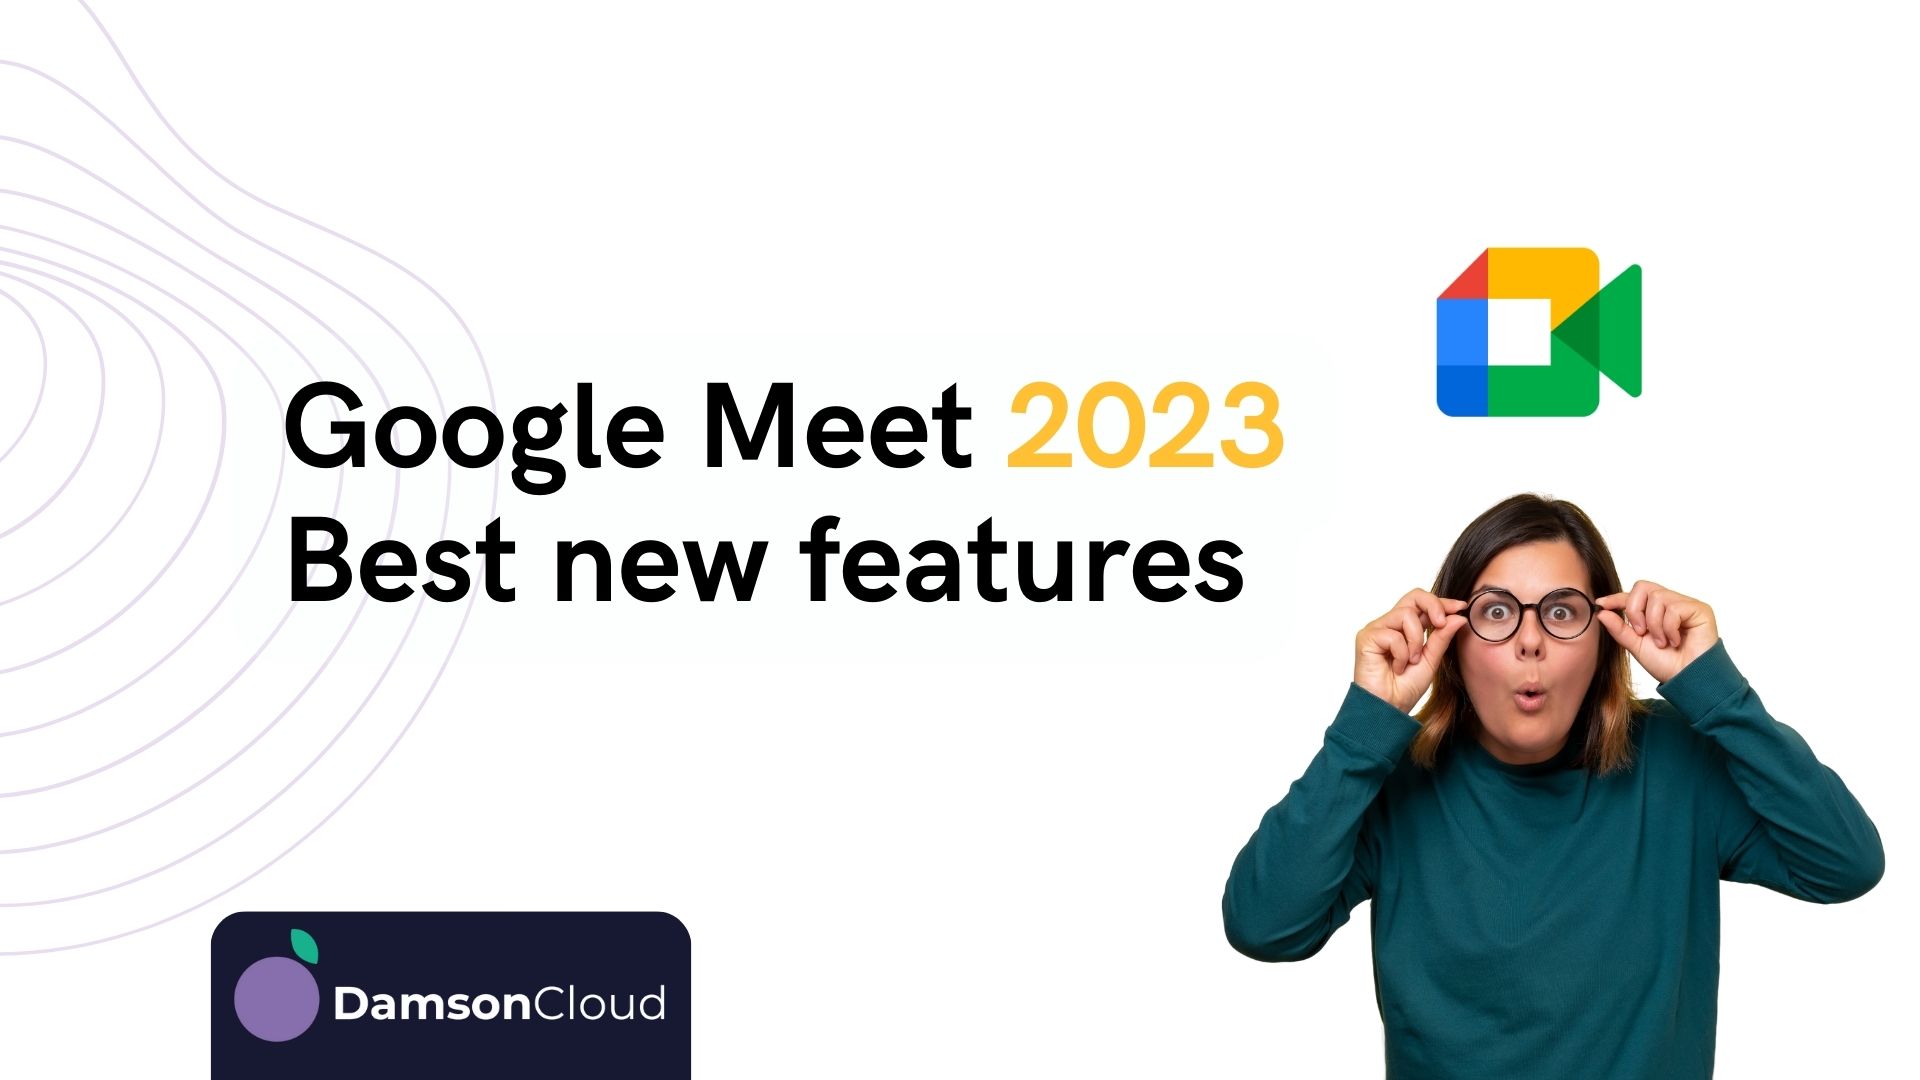 What’s new in Google Meet in 2023?